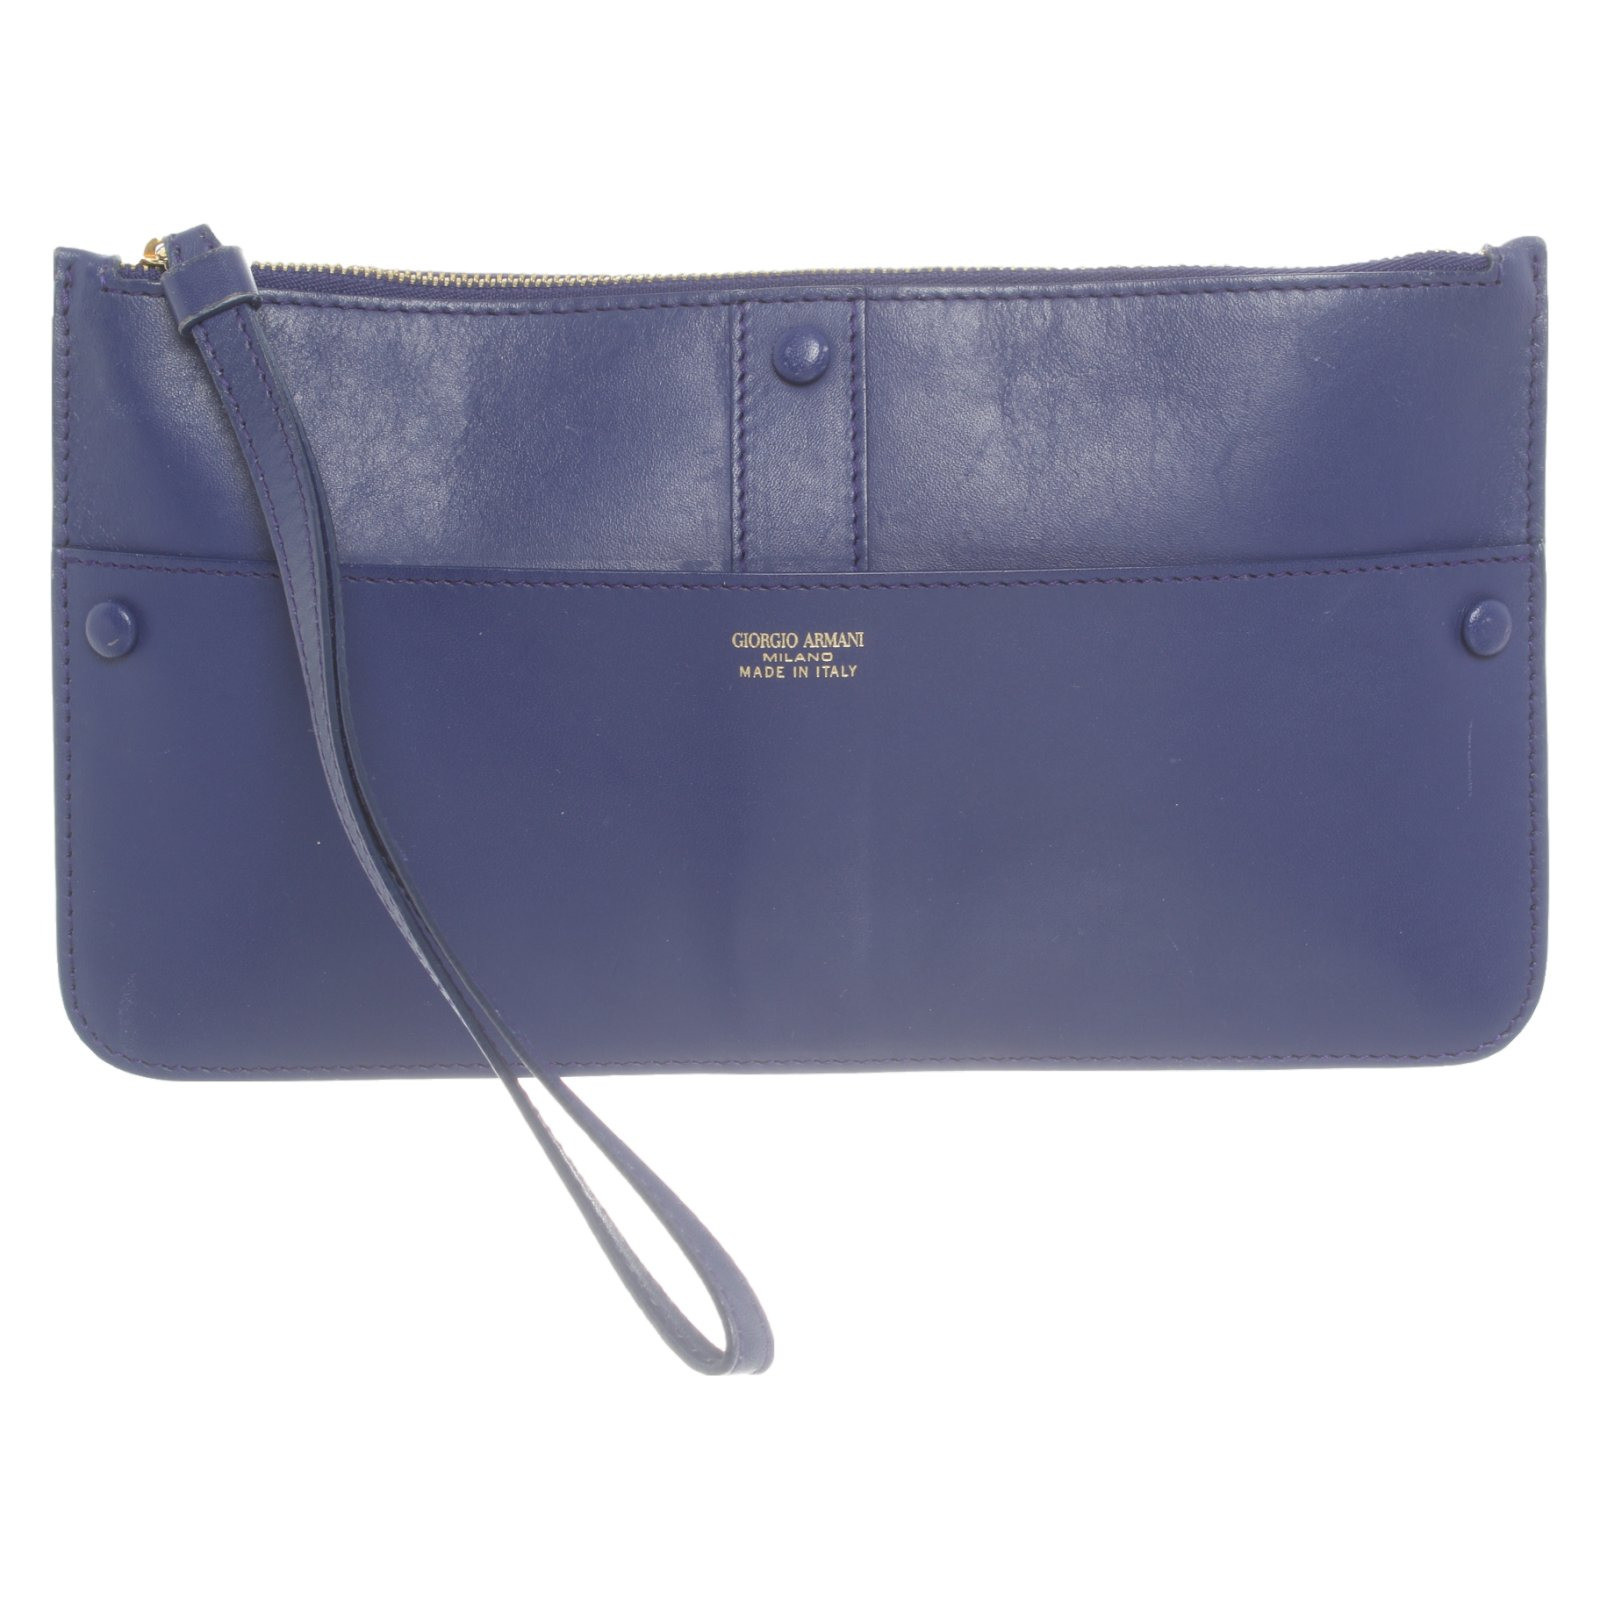 Giorgio Armani Clutch Bag Leather in Blue - Second Hand Giorgio Armani  Clutch Bag Leather in Blue buy used for 59€ (4514974)